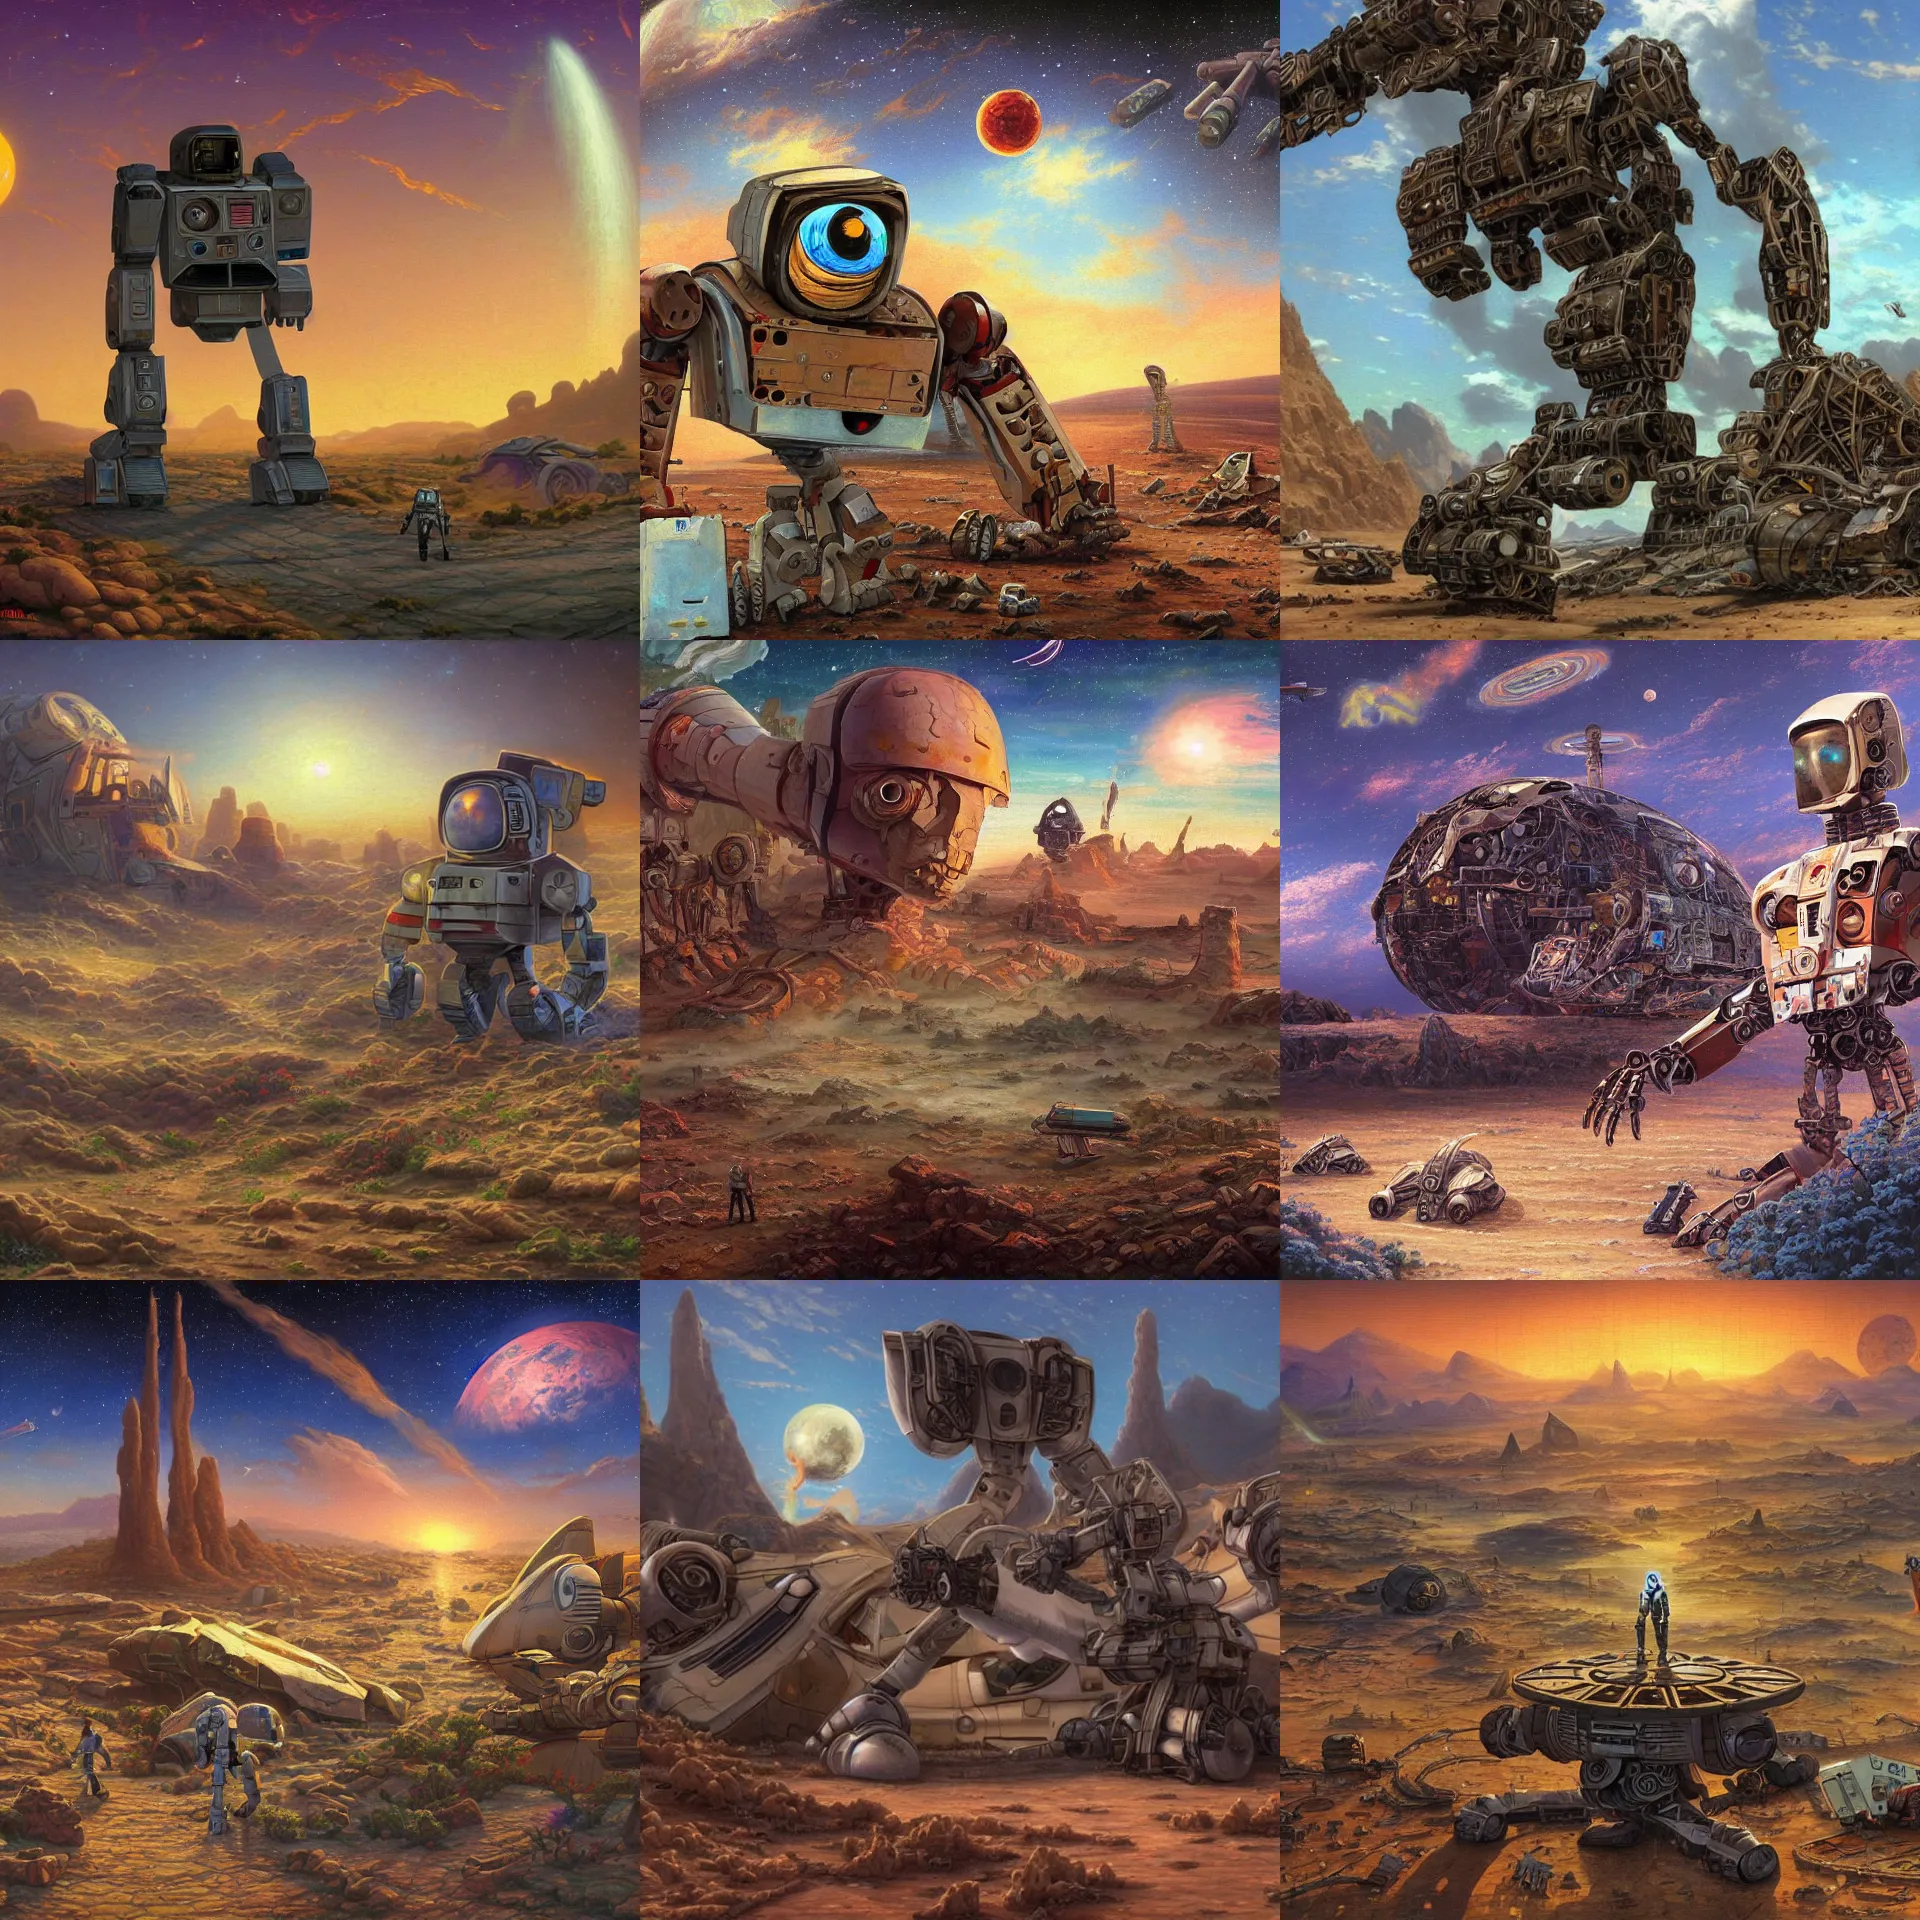 Prompt: next to the wreckage of some parts of a destroyed giant humanoid robot on a remote desert planet, from a space themed point and click 2 d graphic adventure game, art inspired by thomas kinkade